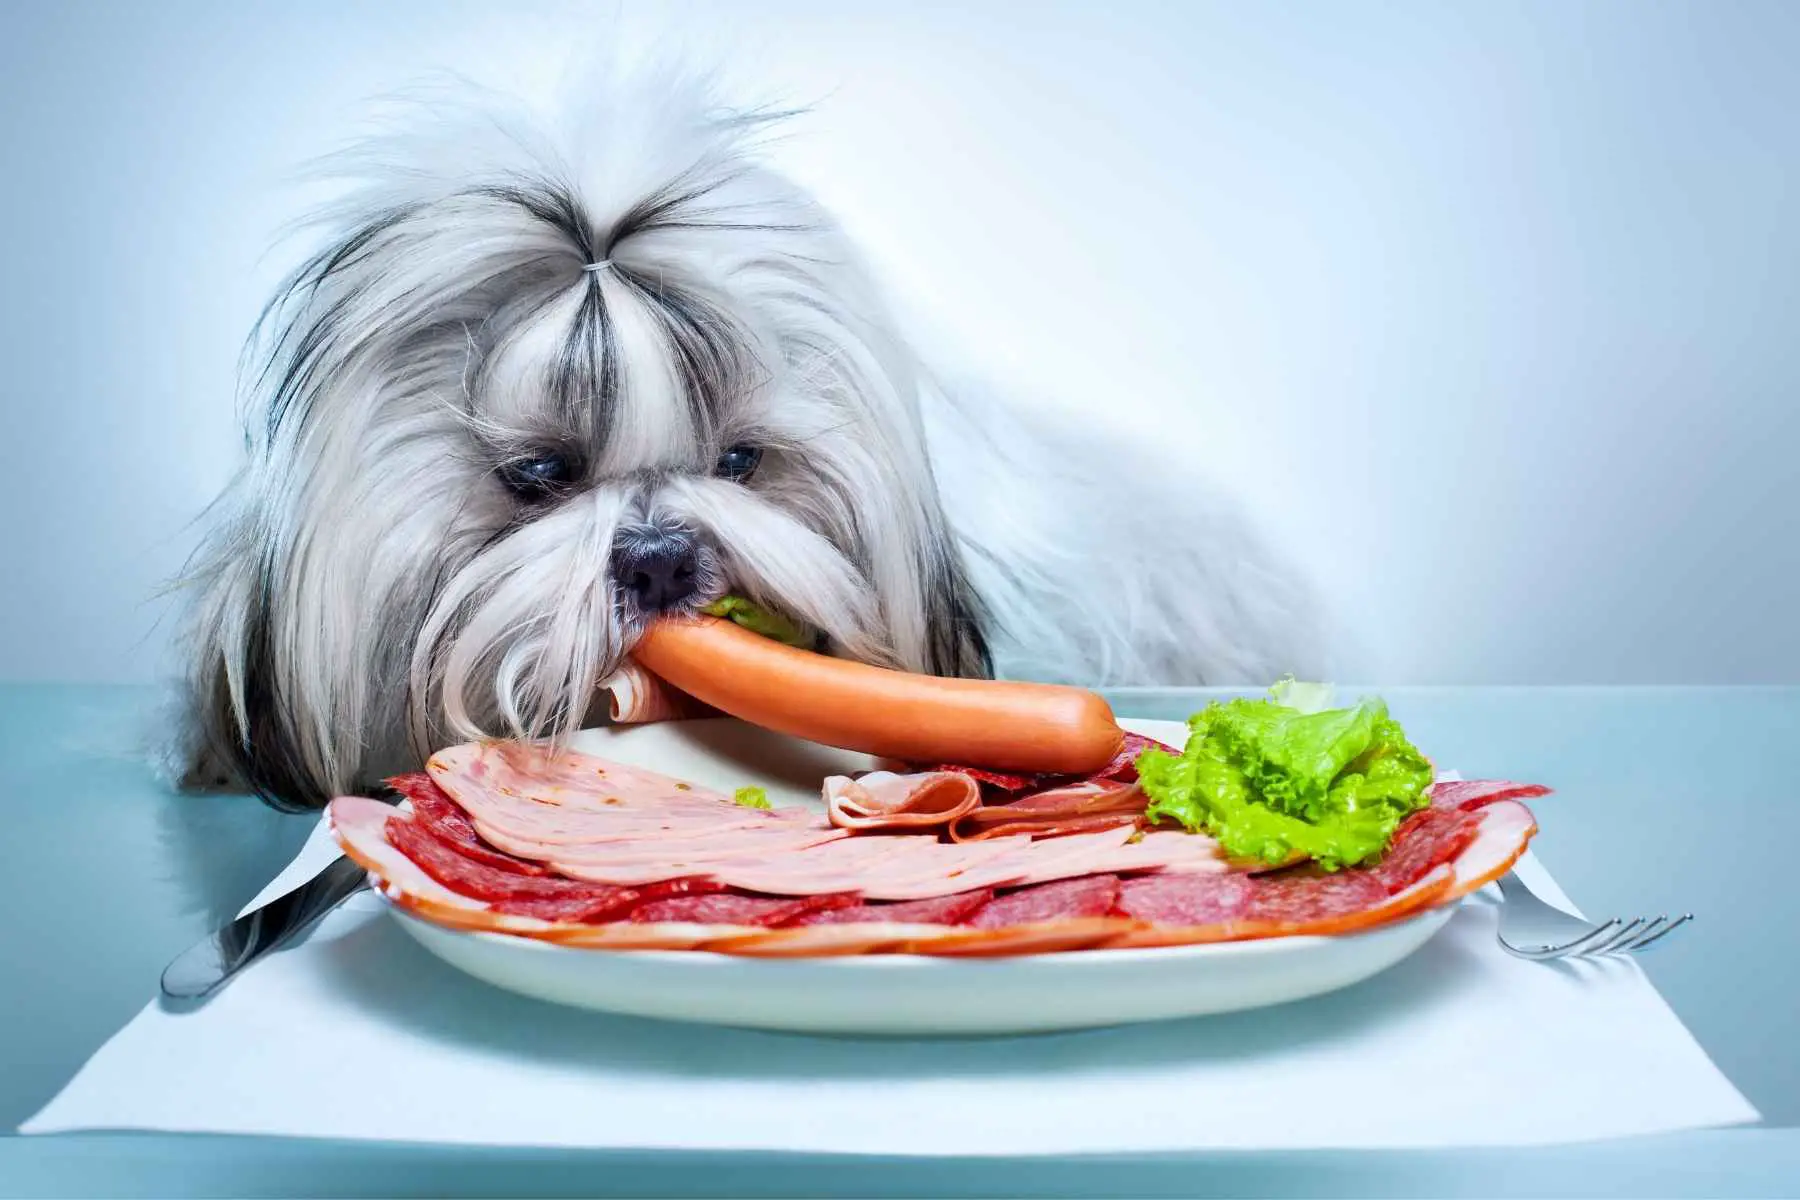 Cute dog eating a lot of food including a hot dog